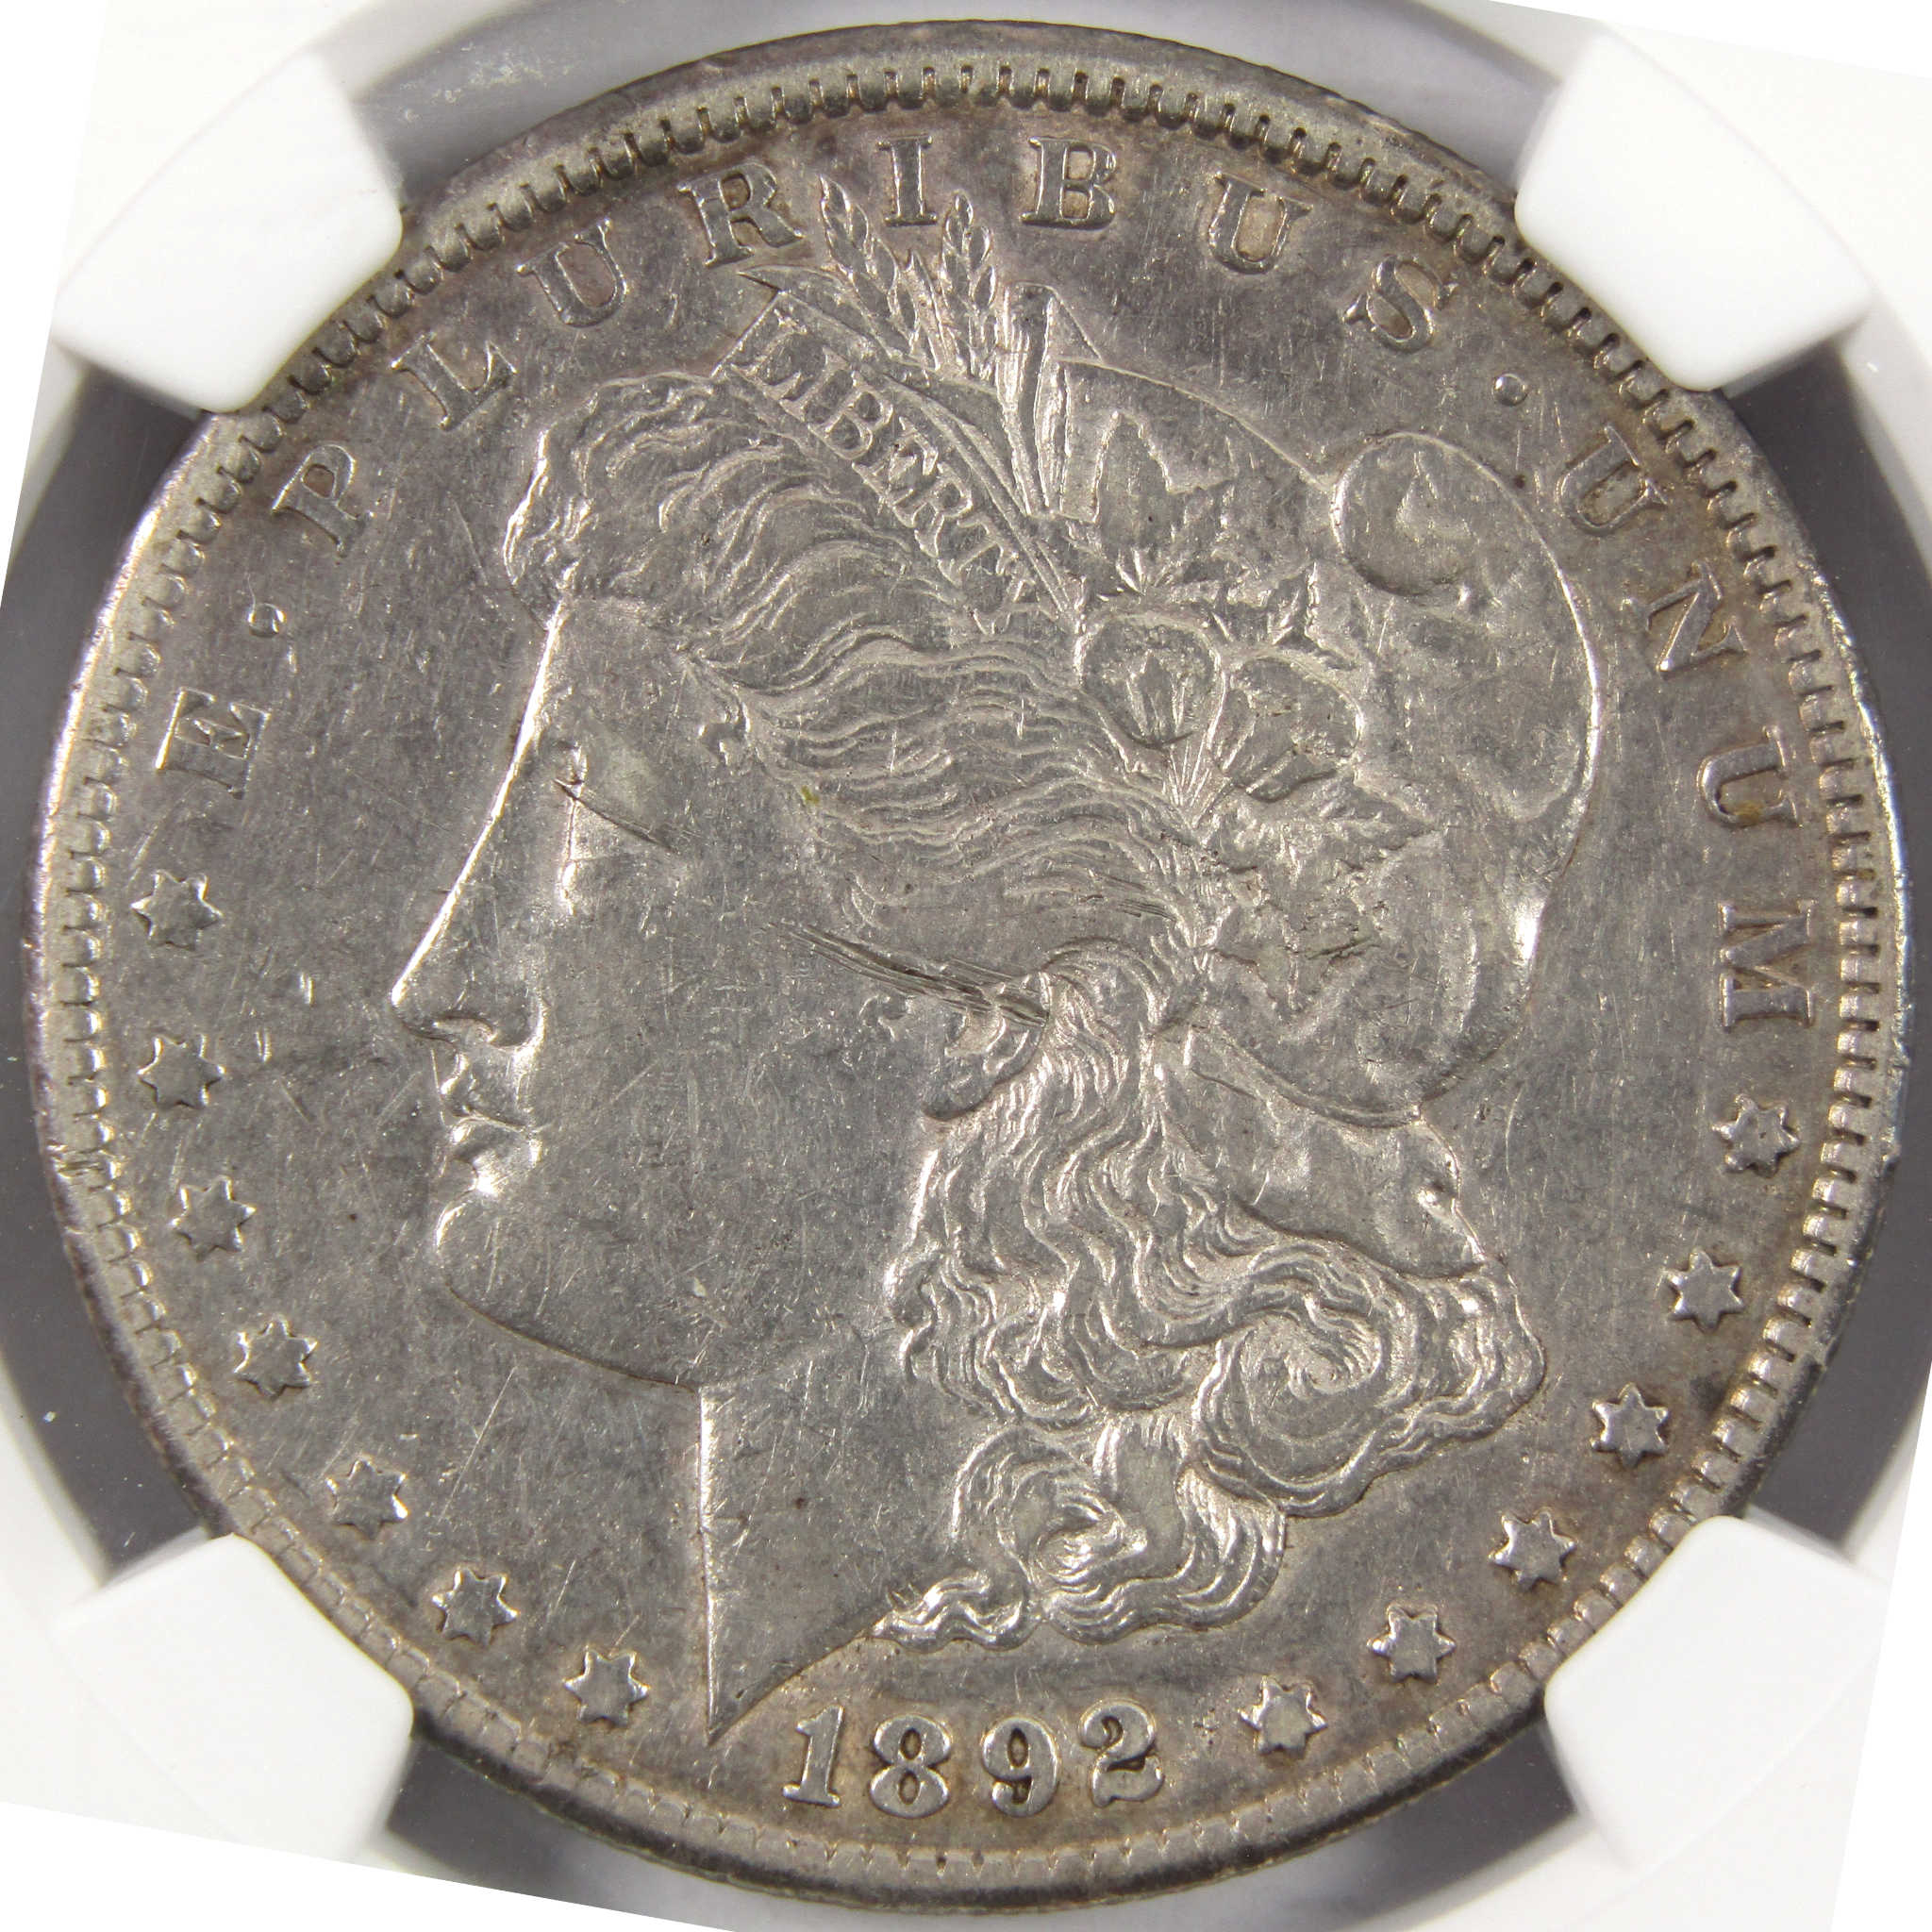 1892 CC Morgan Dollar XF Details NGC 90% Silver $1 Coin SKU:I9479 - Morgan coin - Morgan silver dollar - Morgan silver dollar for sale - Profile Coins &amp; Collectibles